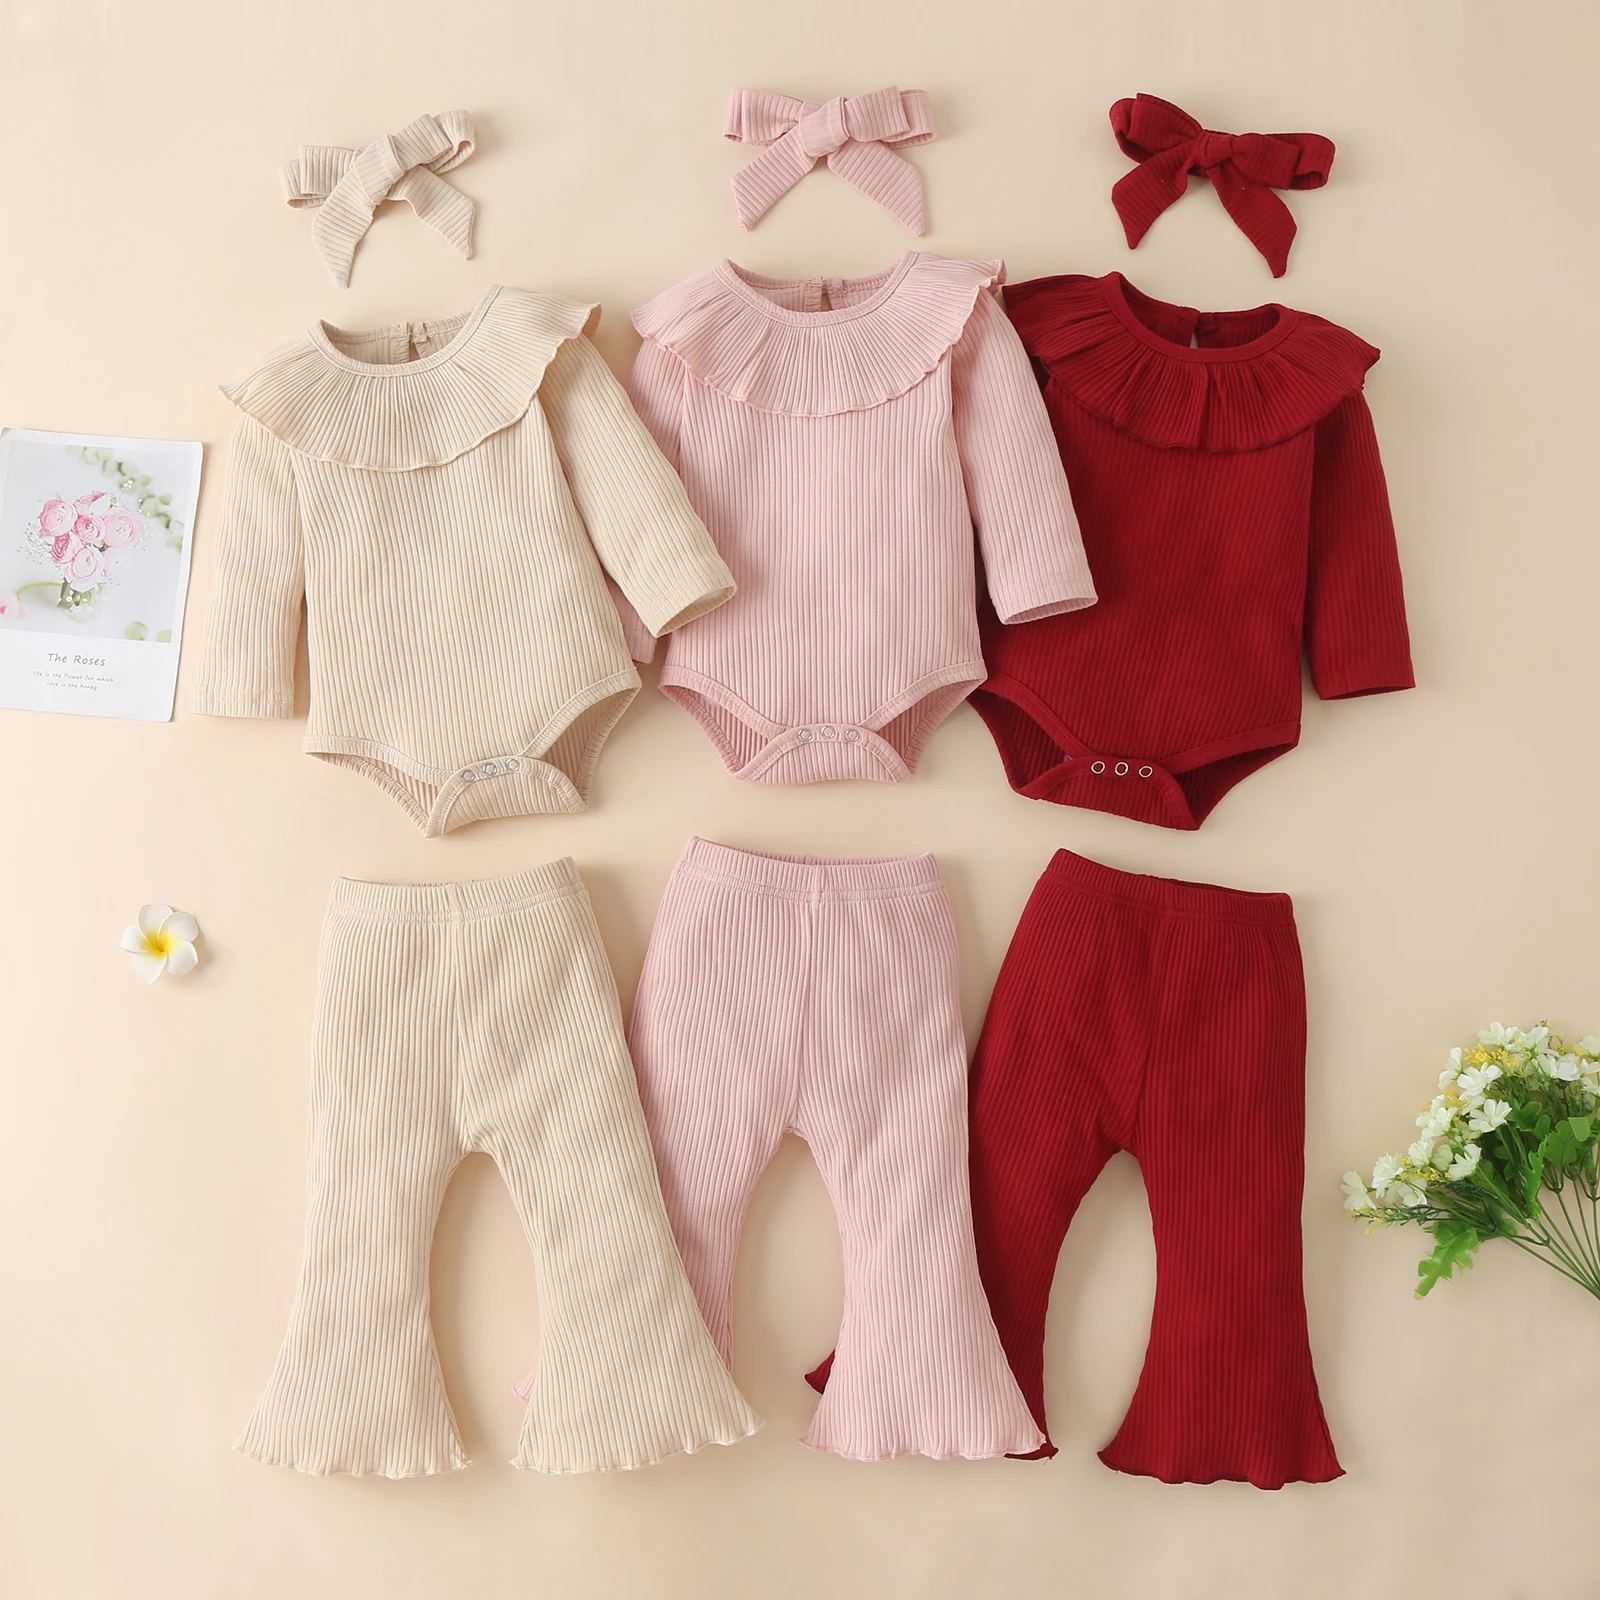 Infant Baby Girls Three-piece Clothes Set, Solid Color Romper, Flared Pants and Headdress, Red/ Pink/ Beige baby dress and set